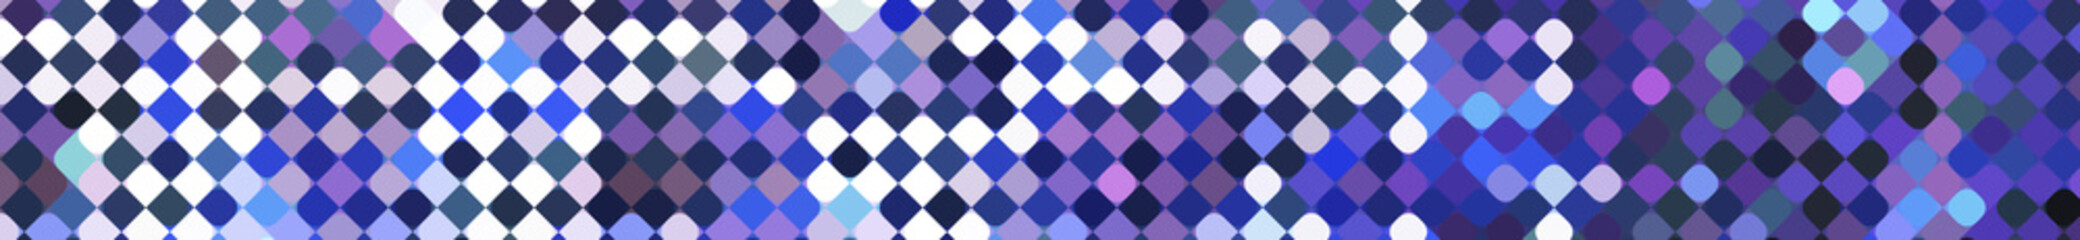 Panoramic violet background texture with mosaic. Geometric mosaic design. Abstract color trendy background. Mosaic texture with geometric shapes.